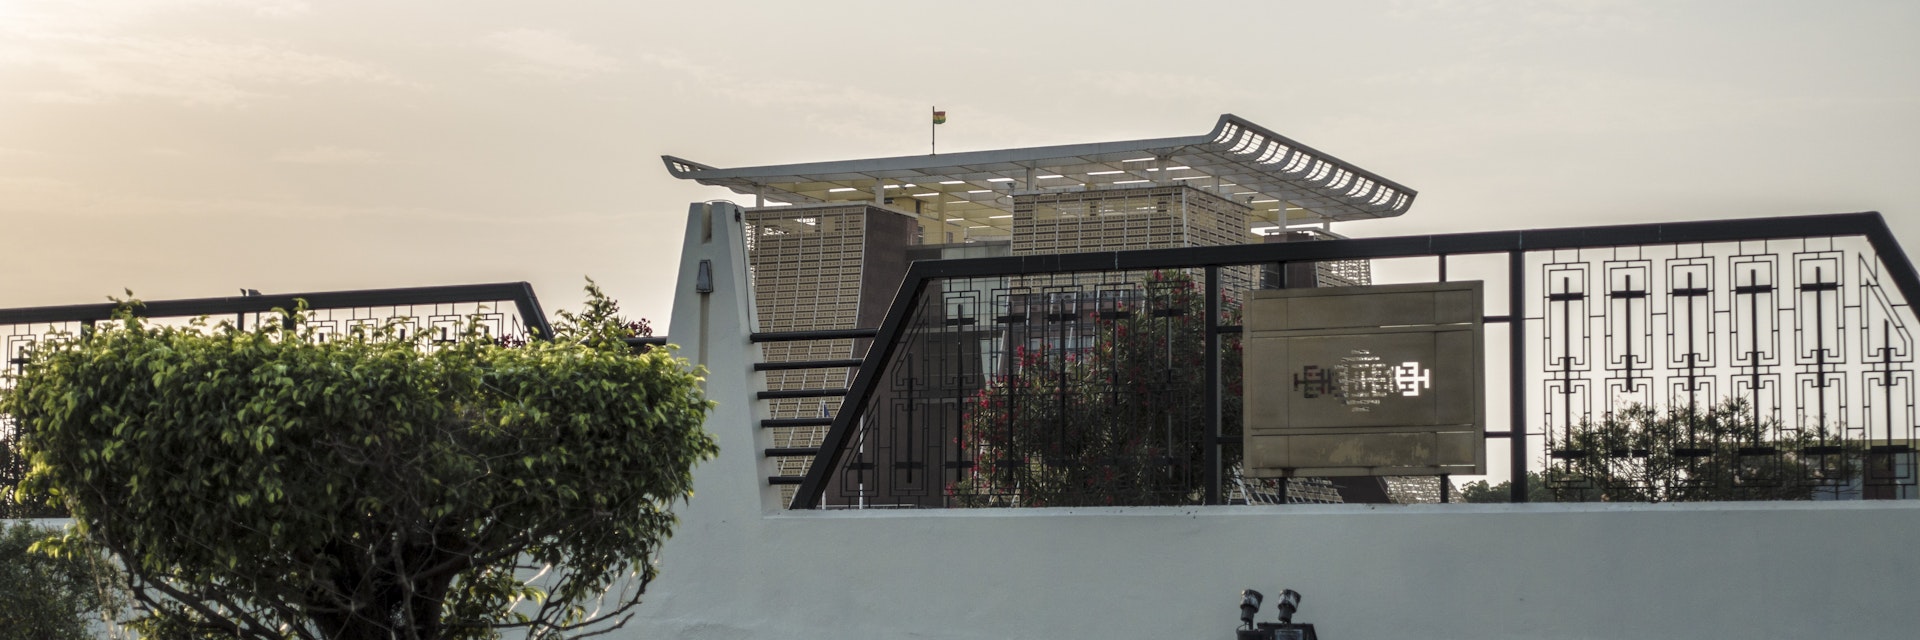 Outside view, Flagstaff House